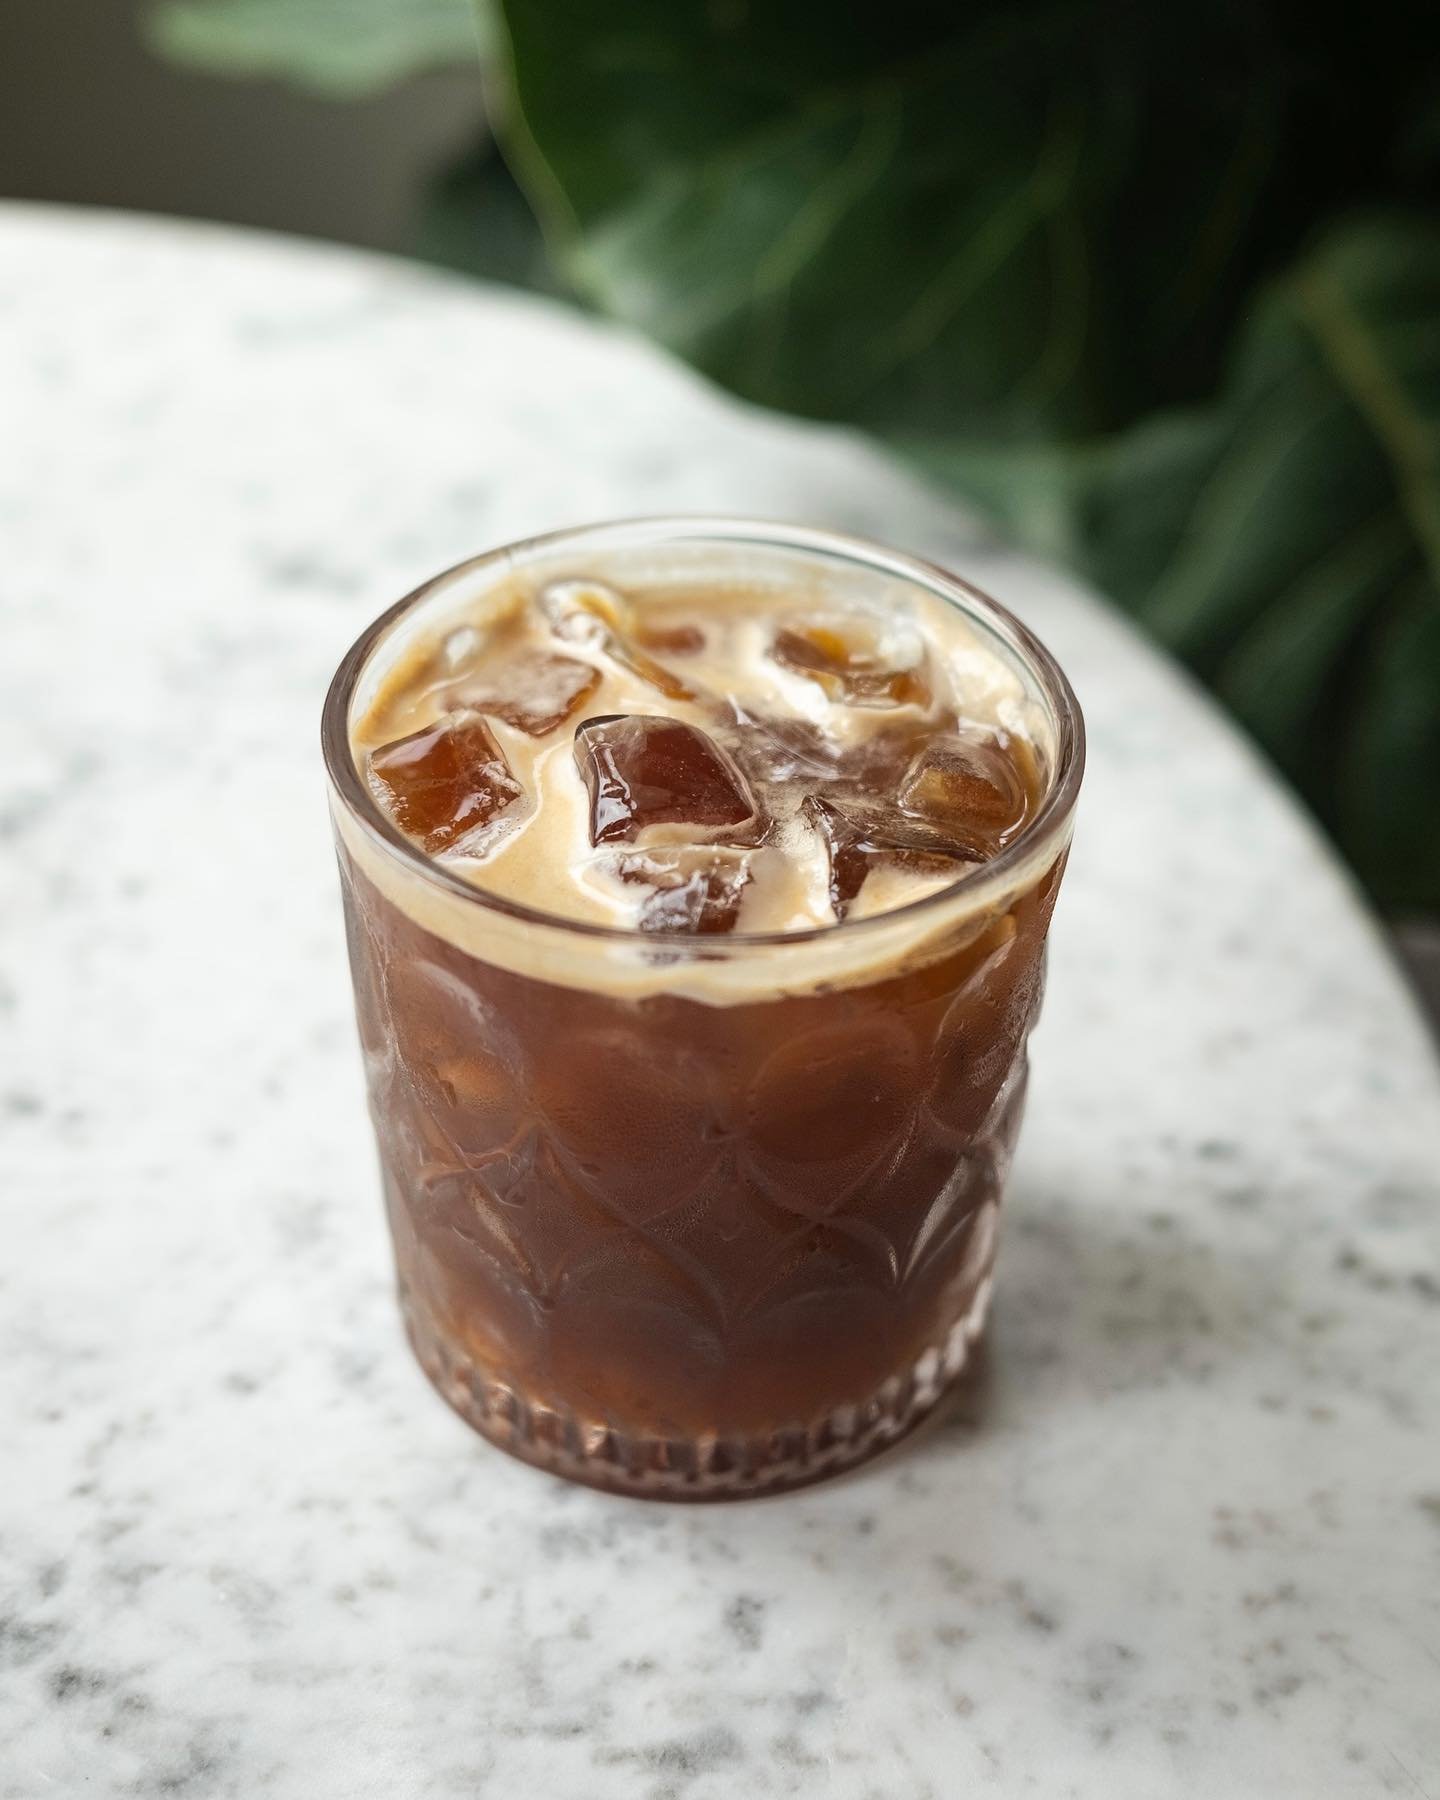 Introducing the Sparkling Espresso! ✨

Perfectly refreshing for a hot day; our Sparkling Espresso is made with Ginger Ale and a single origin double shot of espresso. It&rsquo;s great on its own or flavored with one of our house made syrups.🧊